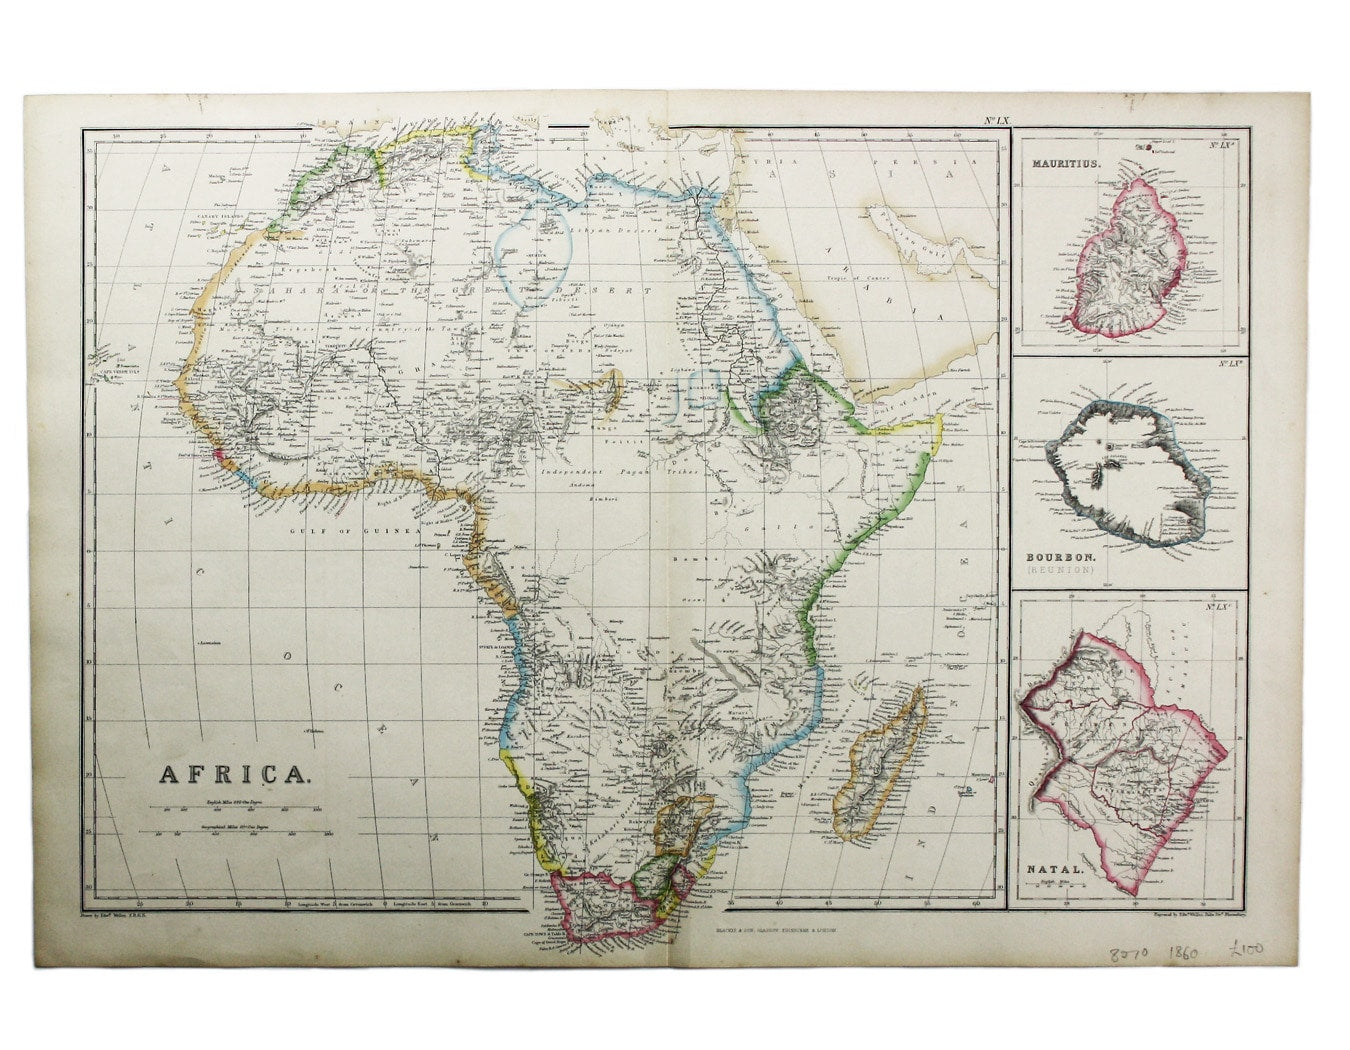 Walter Blackie’s Map of Africa